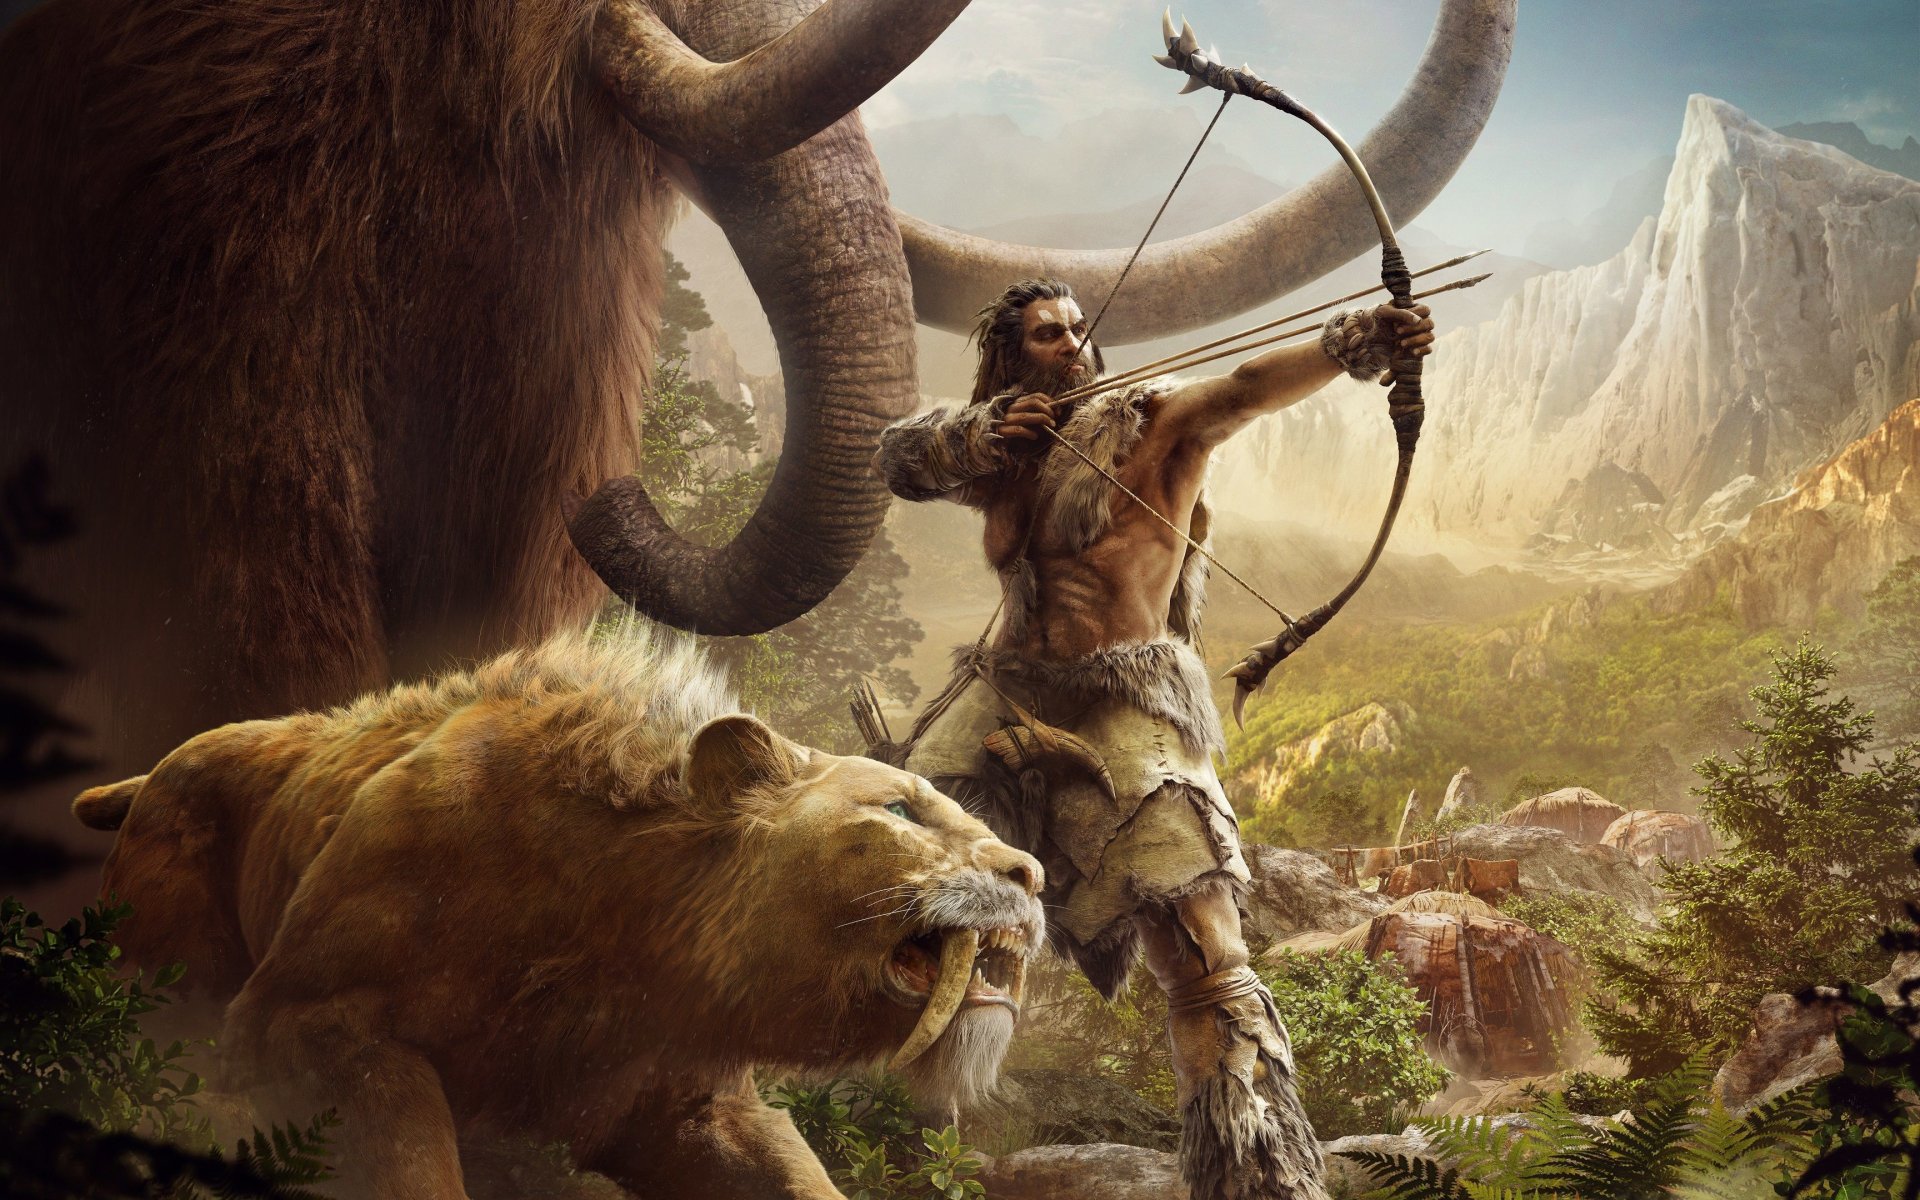 download cry primal for free